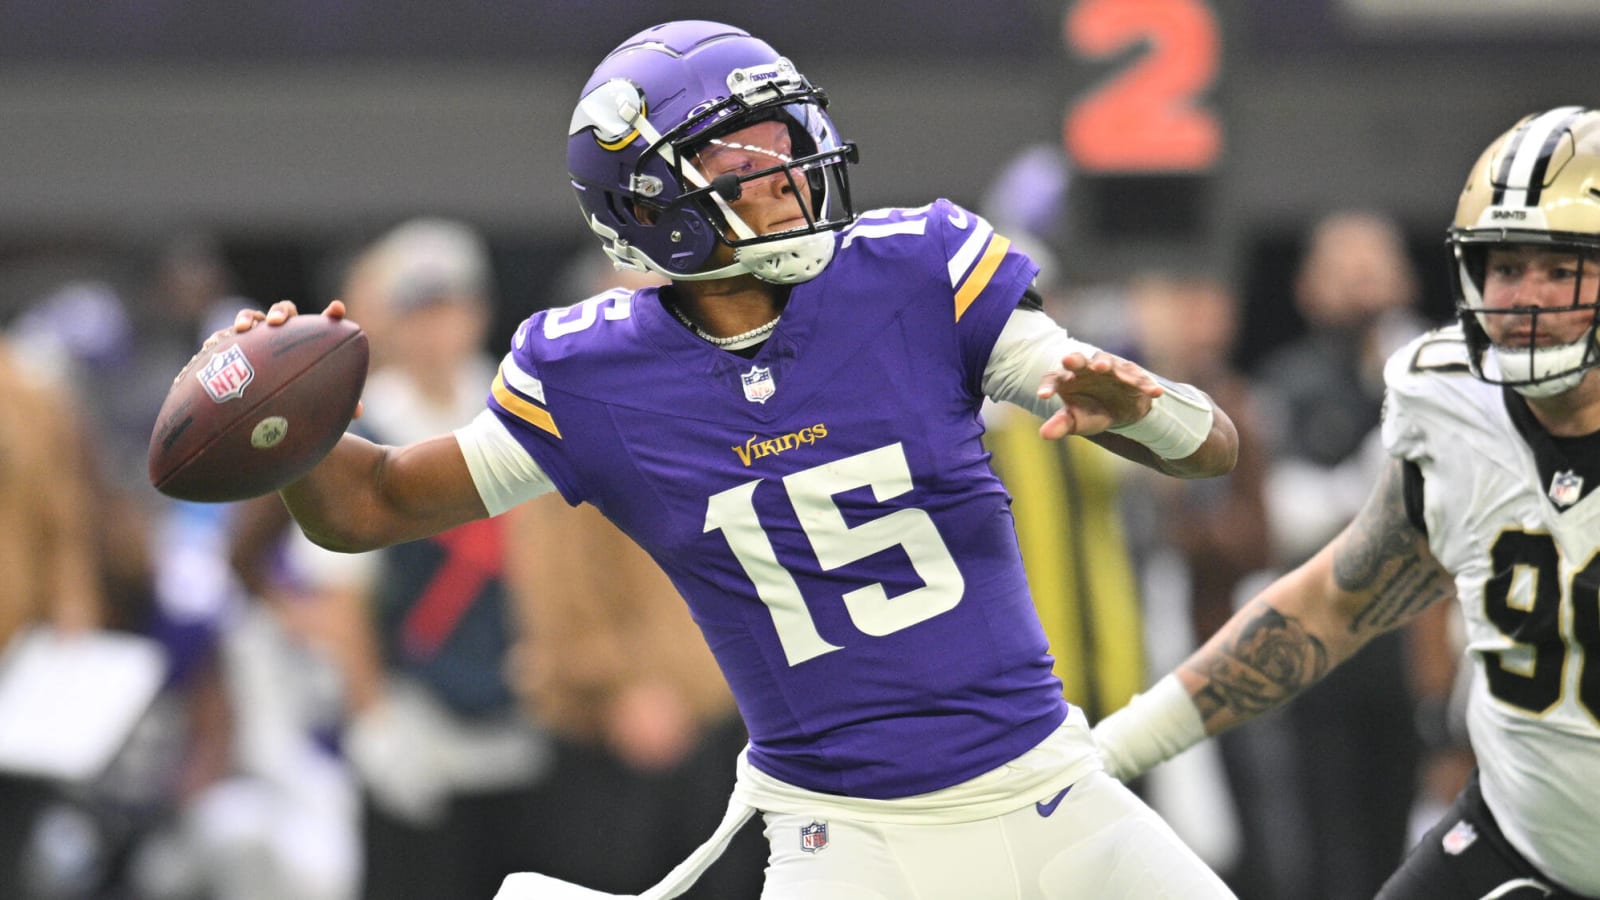 Post-waiver wire fantasy football pickups for Week 11